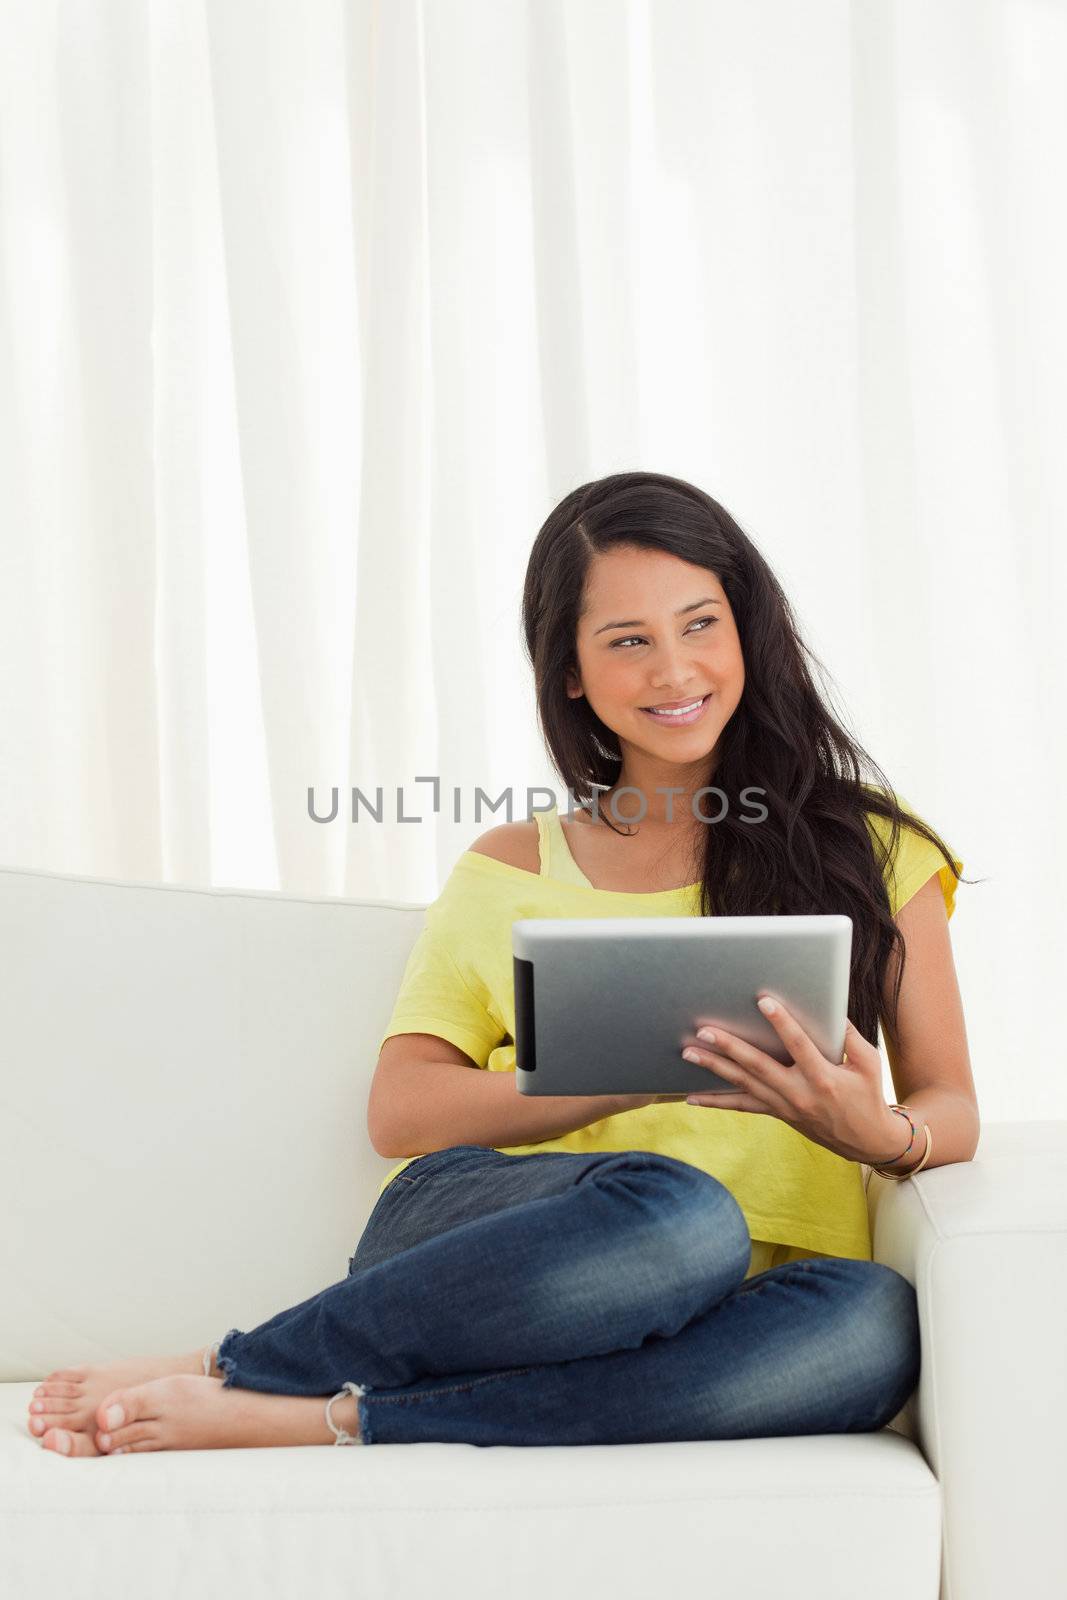 Beautiful Latino smiling while using a touch pad on a sofa